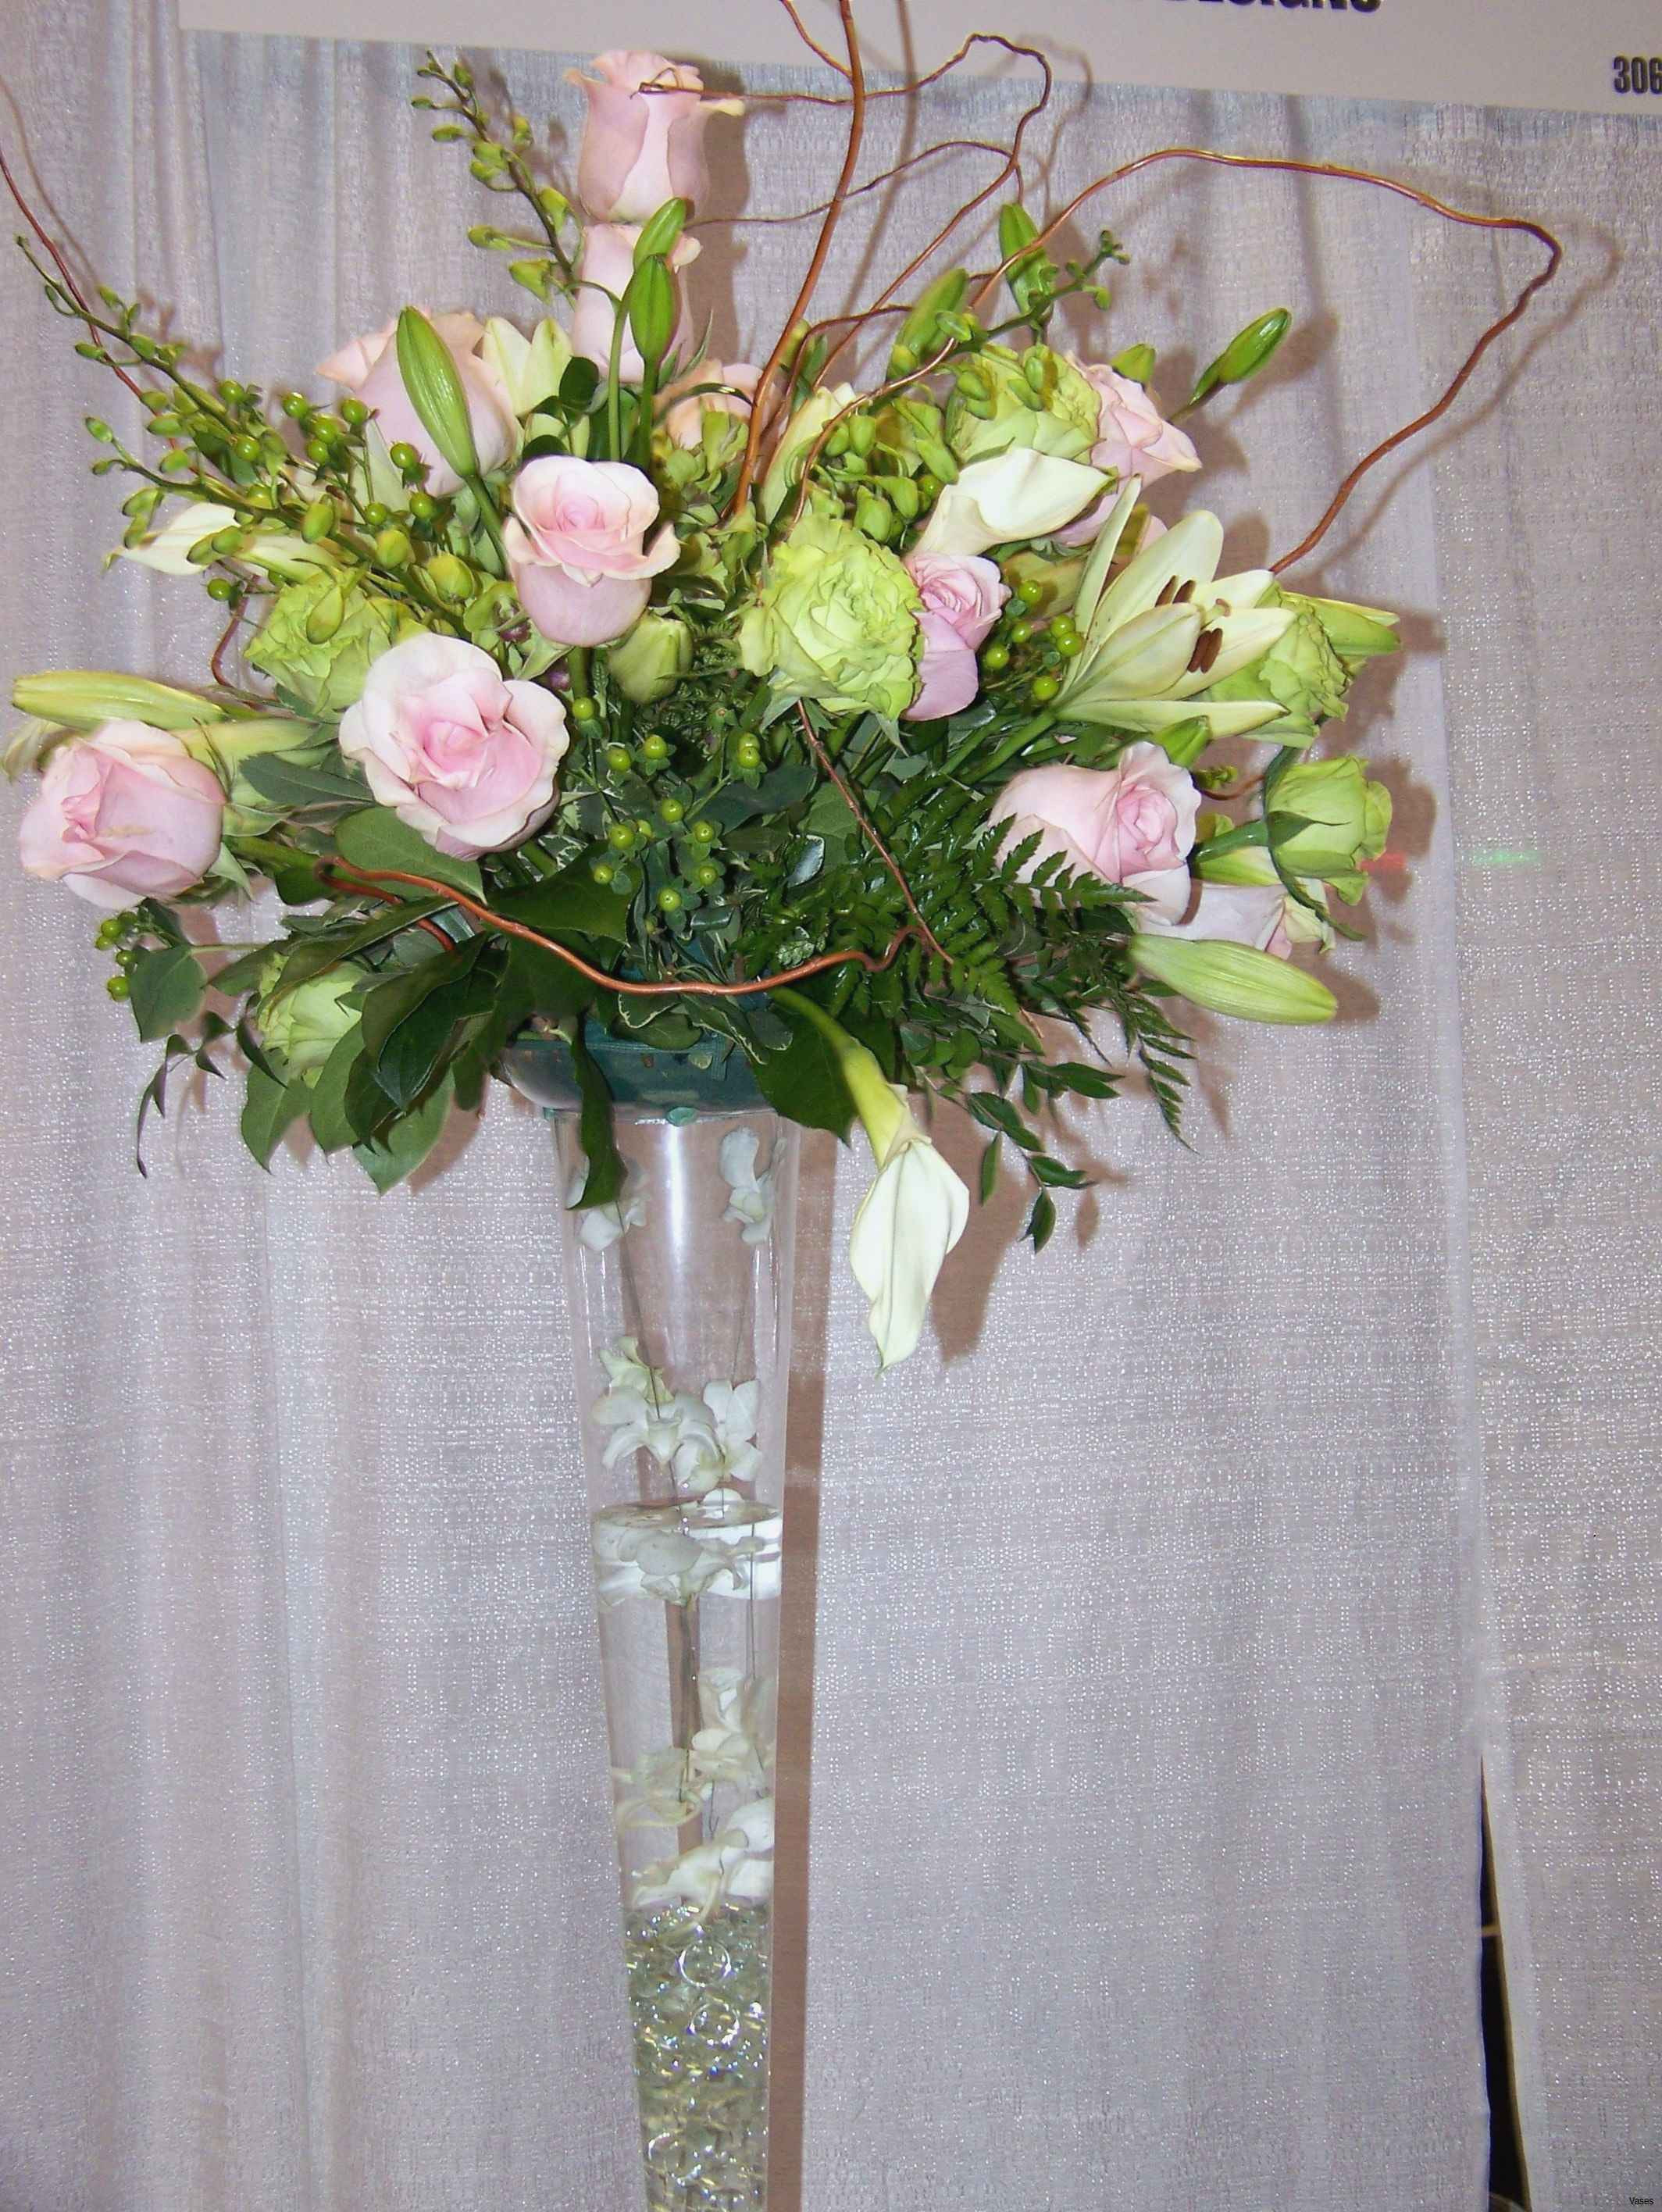 wedding centerpiece vases for sale of elegant fall wedding bouquet wedding theme throughout h vases ideas for floral arrangements in i 0d design ideas design inspiration rustic fall